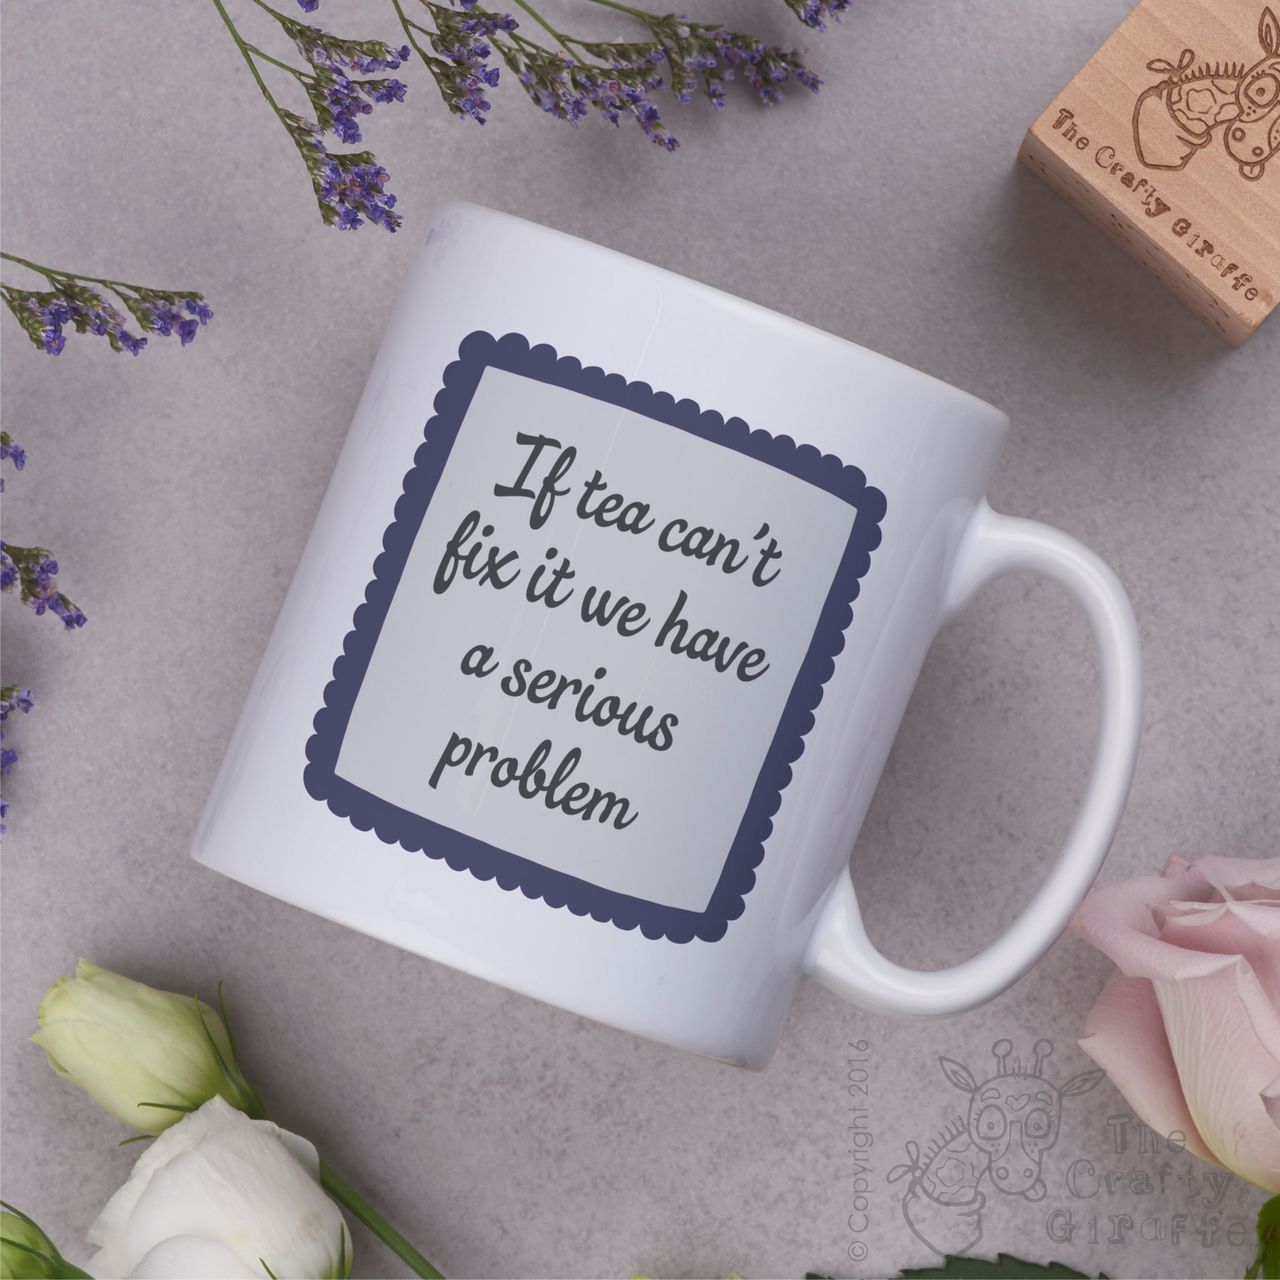 If tea can’t fix it we have a serious problem Mug